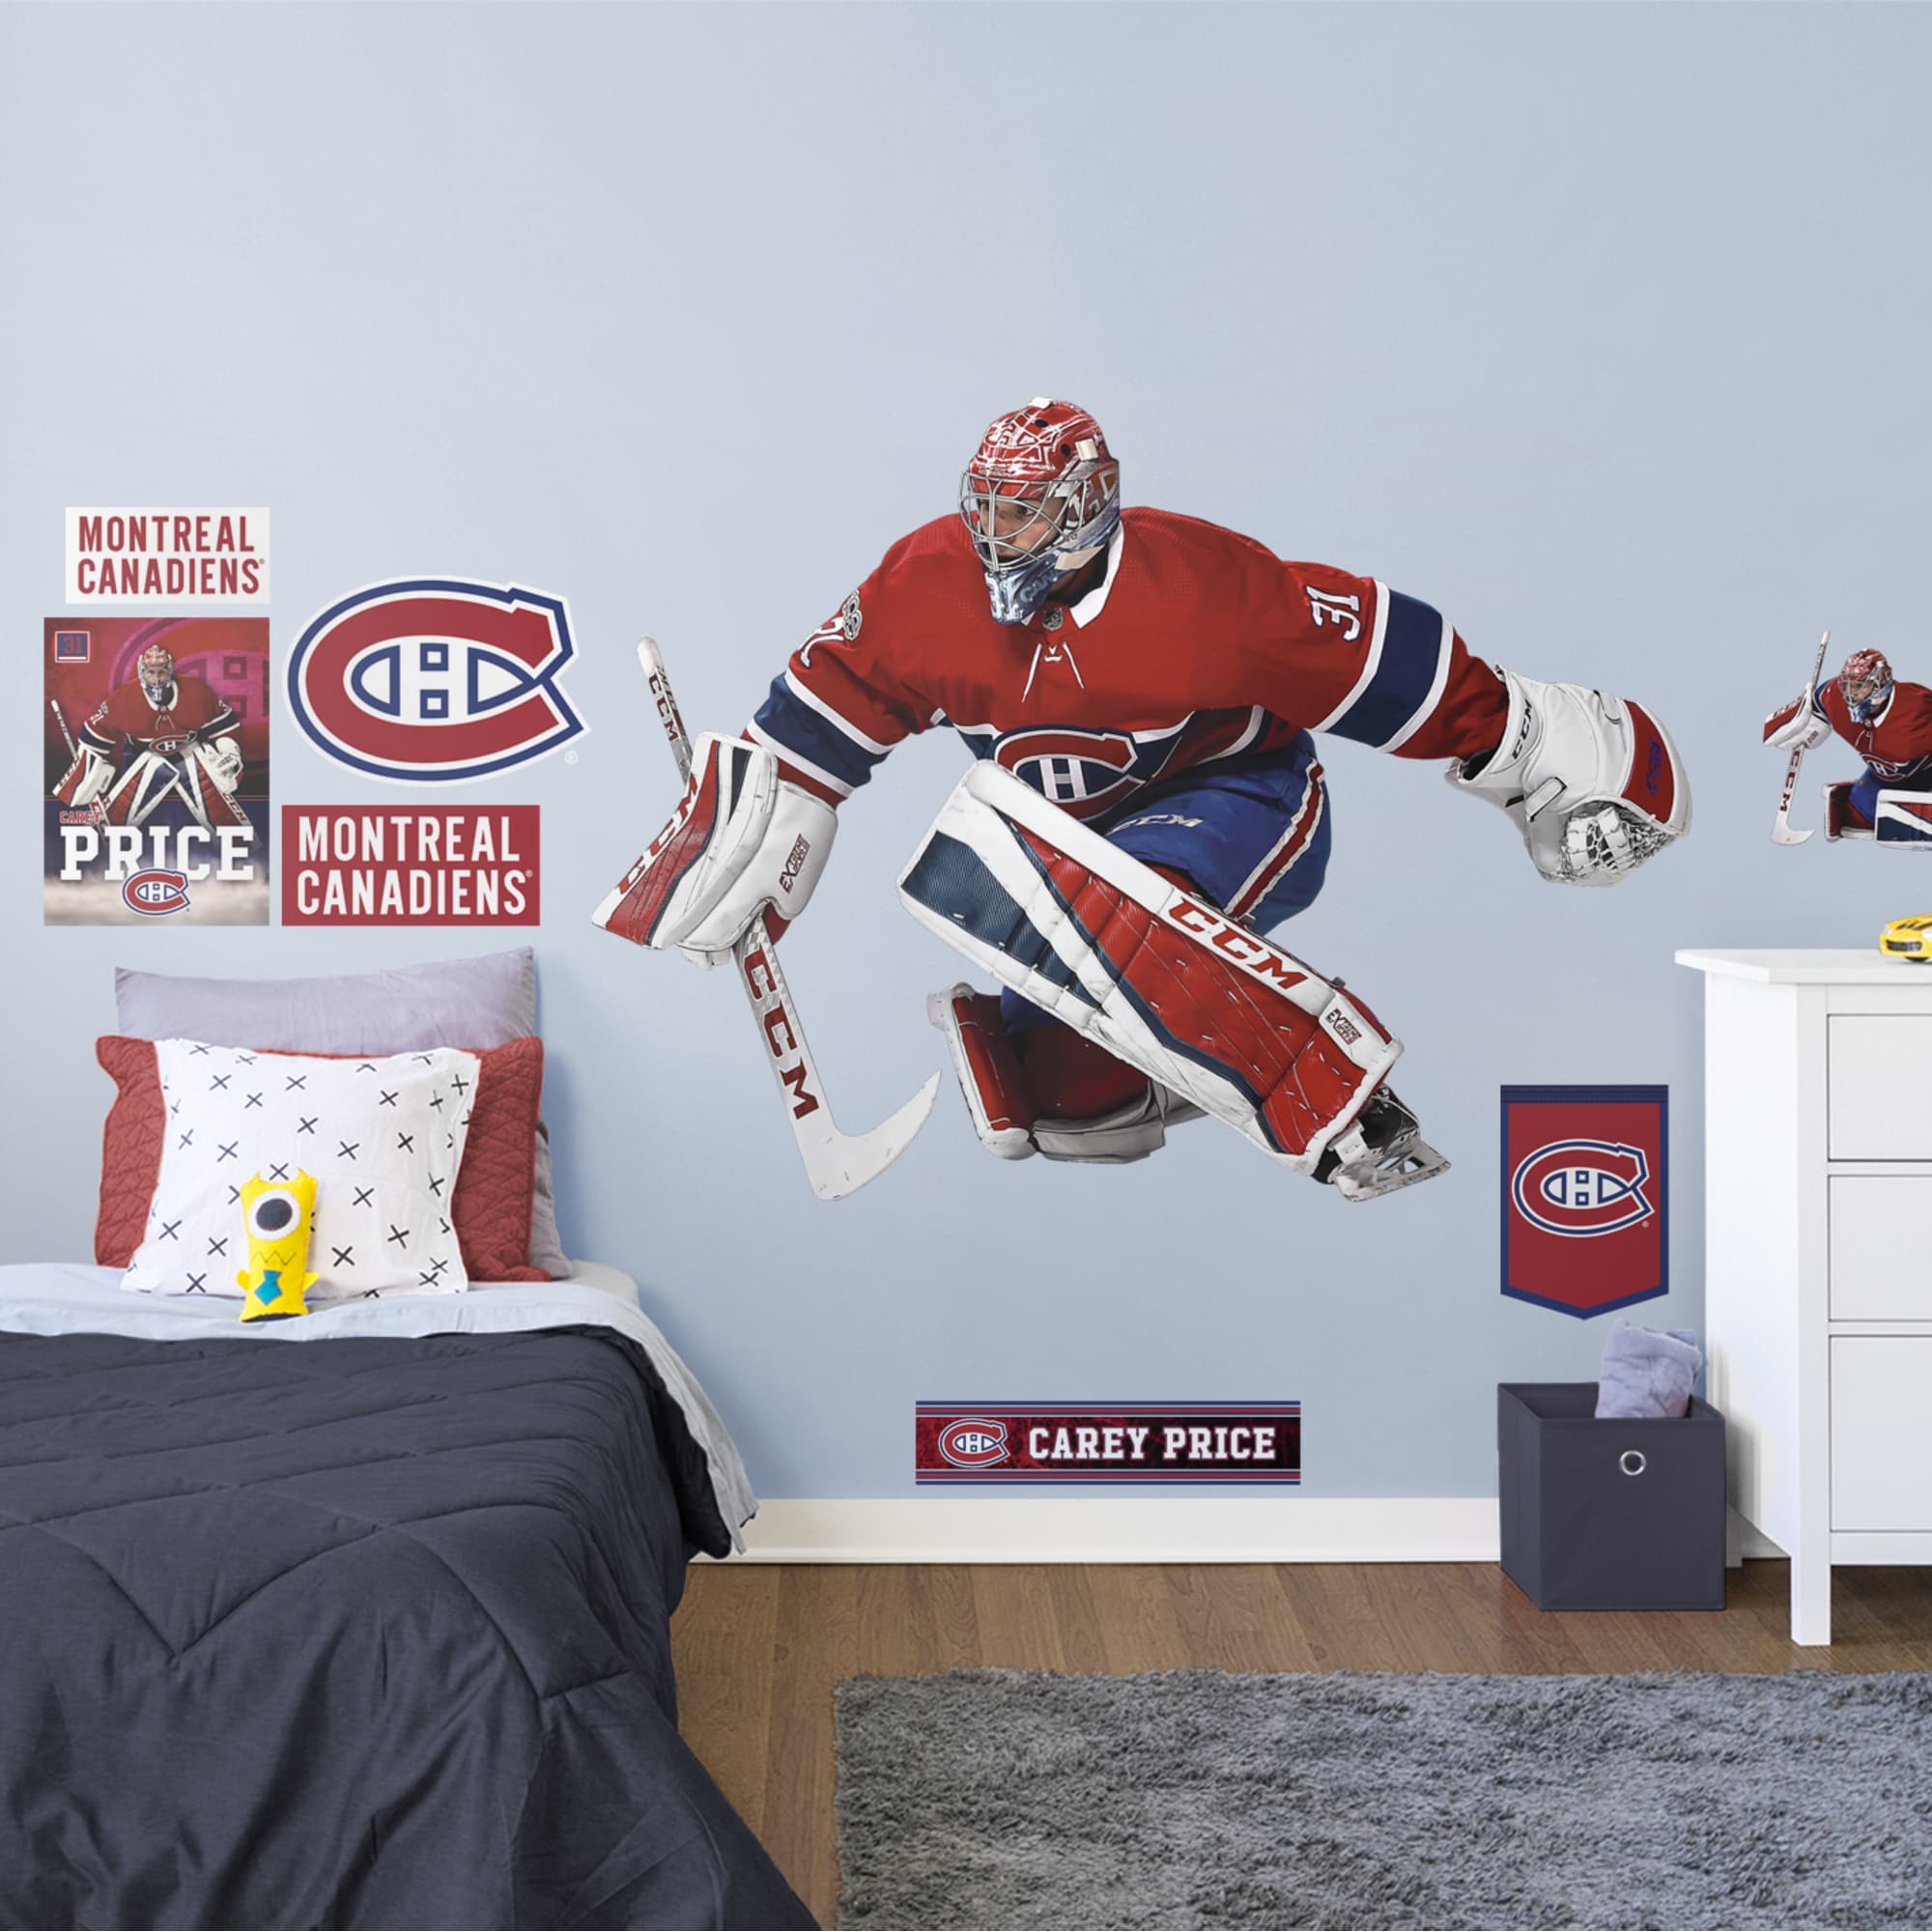 Carey Price for Montreal Canadiens - Officially Licensed NHL Removable Wall Decal Life-Size Athlete + 10 Decals (70"W x 51"H) by